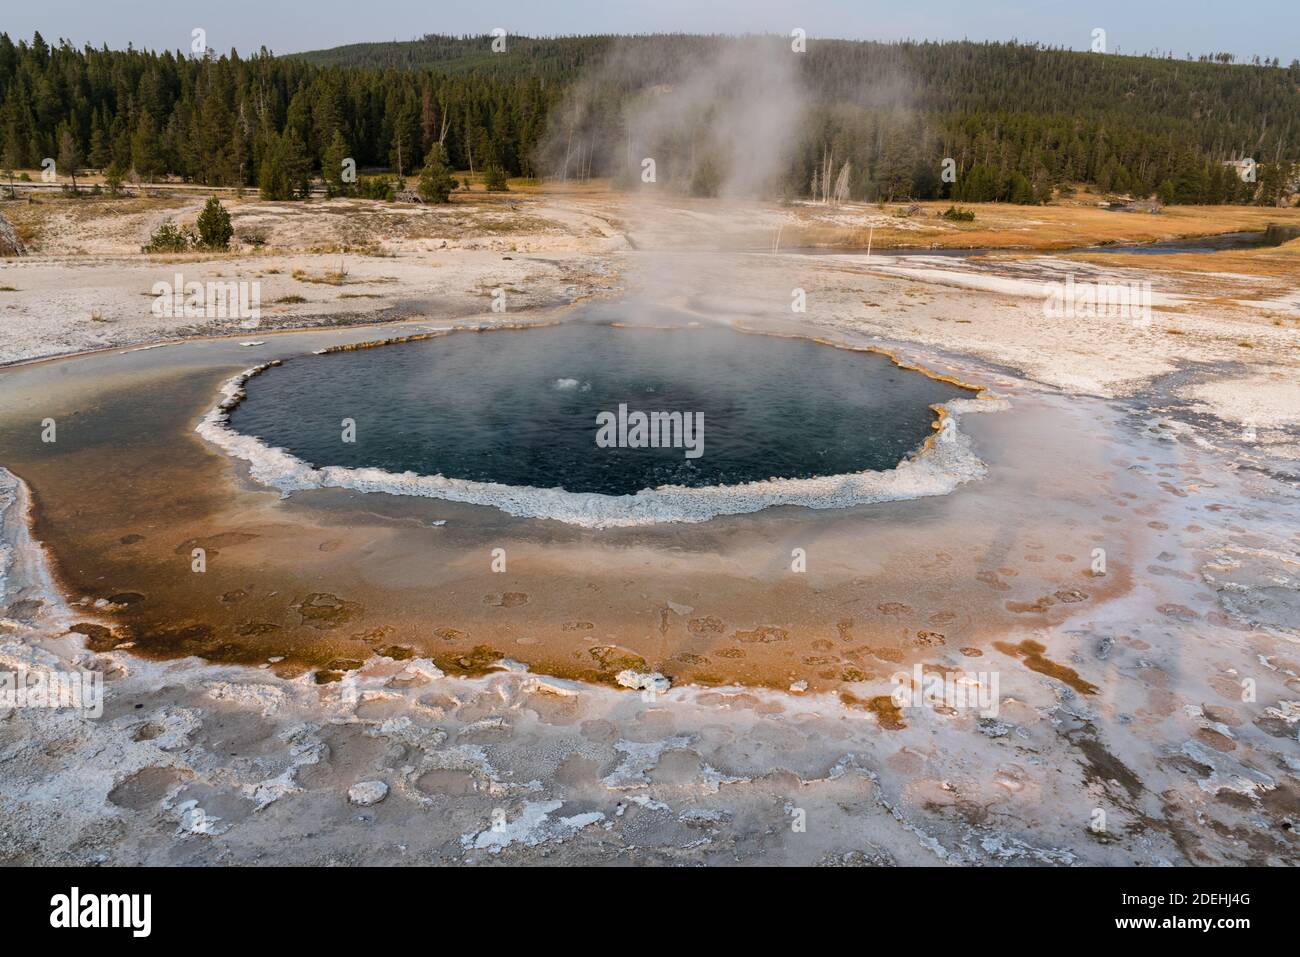 The Crested Pool is a bubble-shower-type spring, Upper Geyser Basin, Yellowstone National Park, Wyoming, USA. Stock Photo